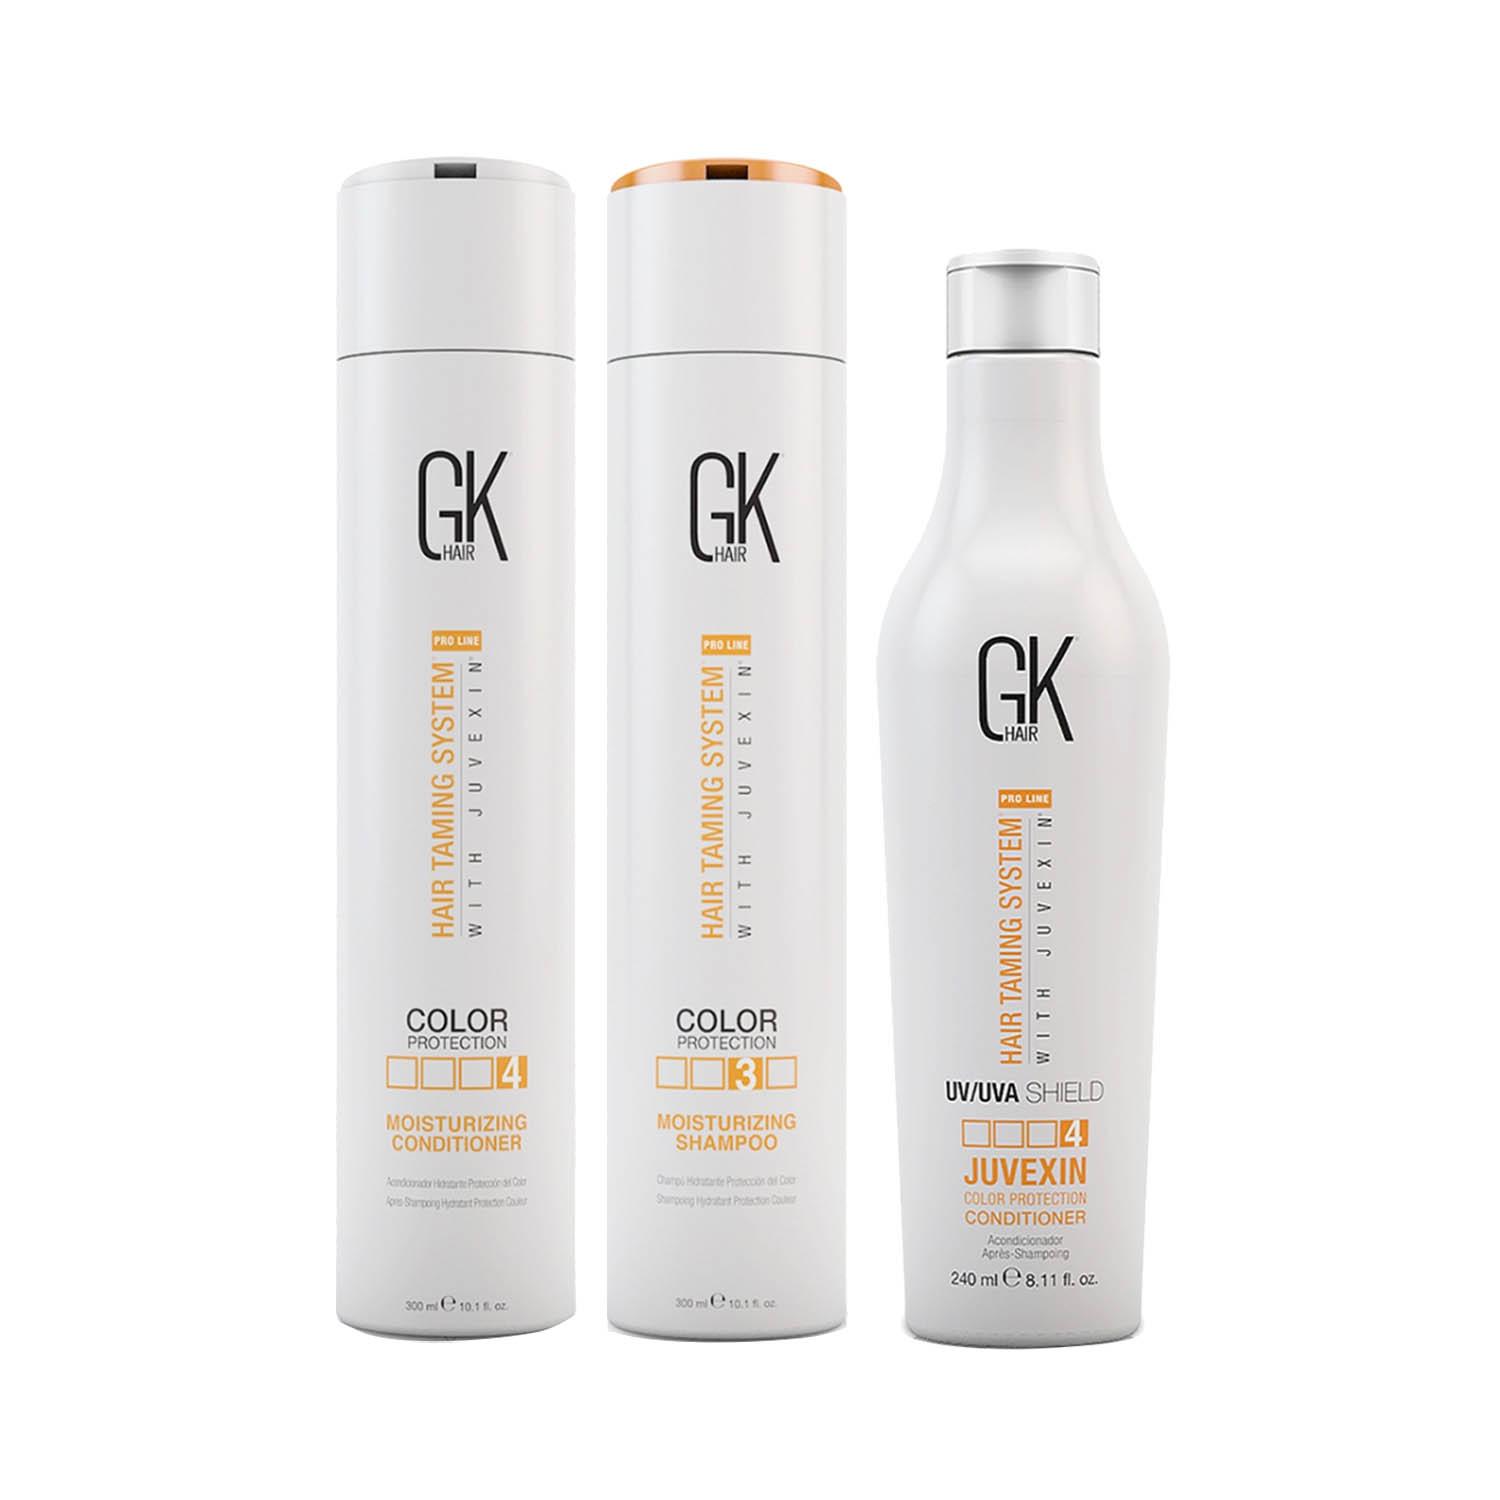 GK Hair | GK Hair Moisturizing Shampoo and Conditioner 300ml with Color Shield Conditioner 240ml